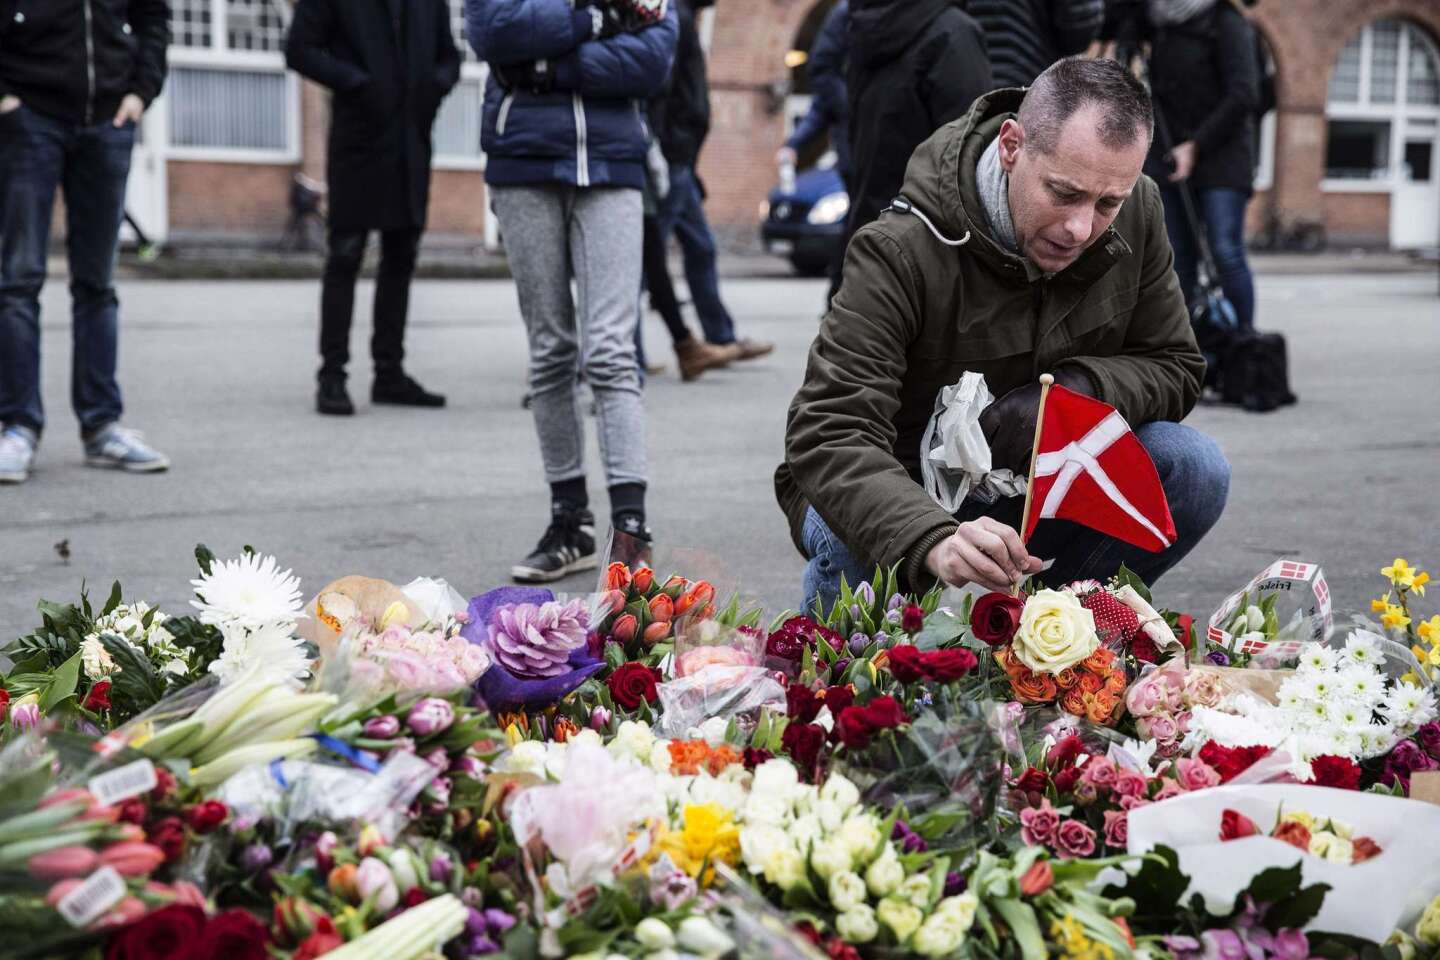 A man places a Danish flag next to flowers for the shooting victims outside the "Kruttoende" cultural centre in Copenhagen.